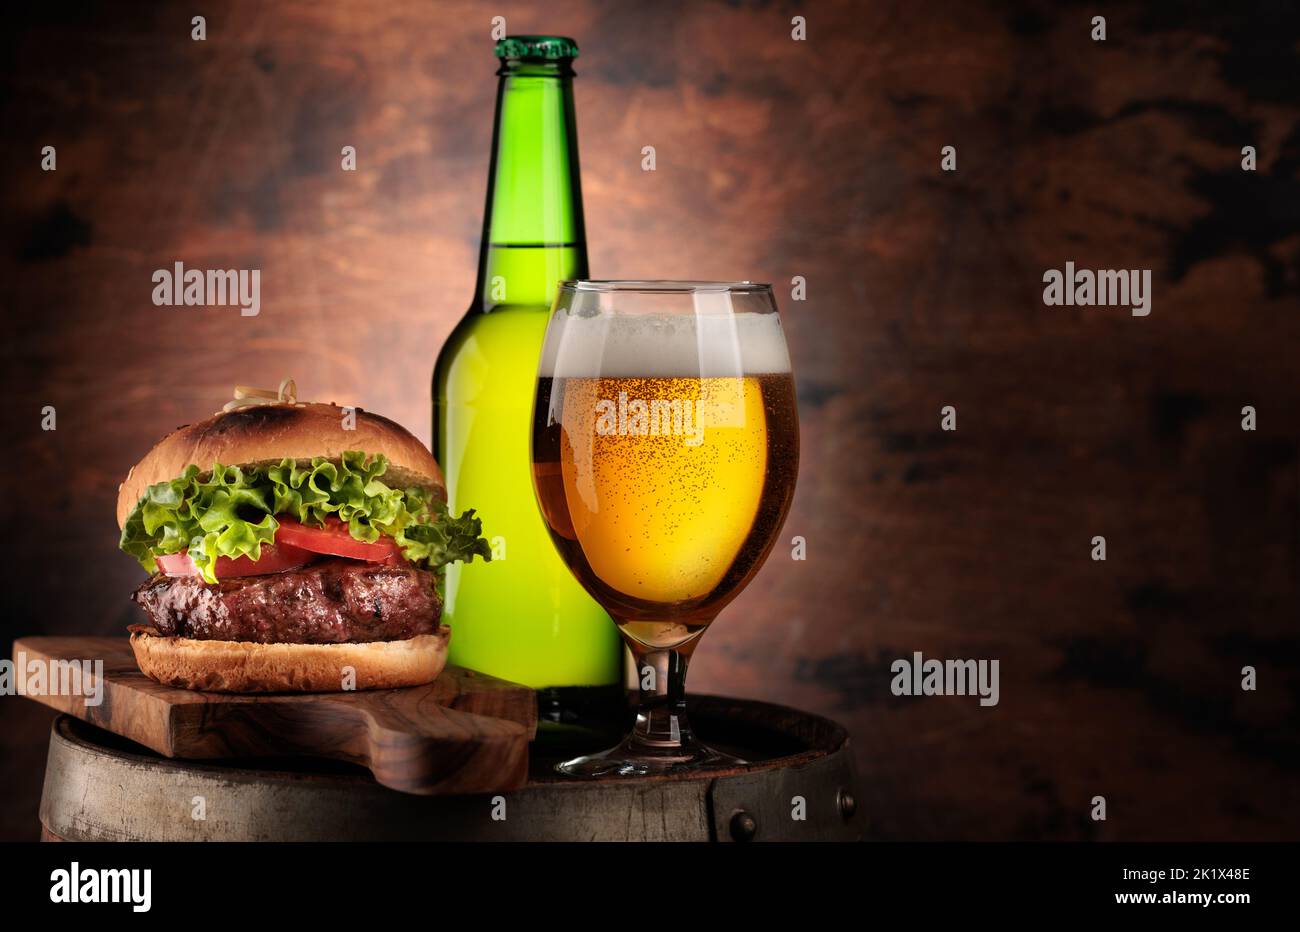 Draft beer glass, bottle and hamburger on wooden barrel. With copy space Stock Photo